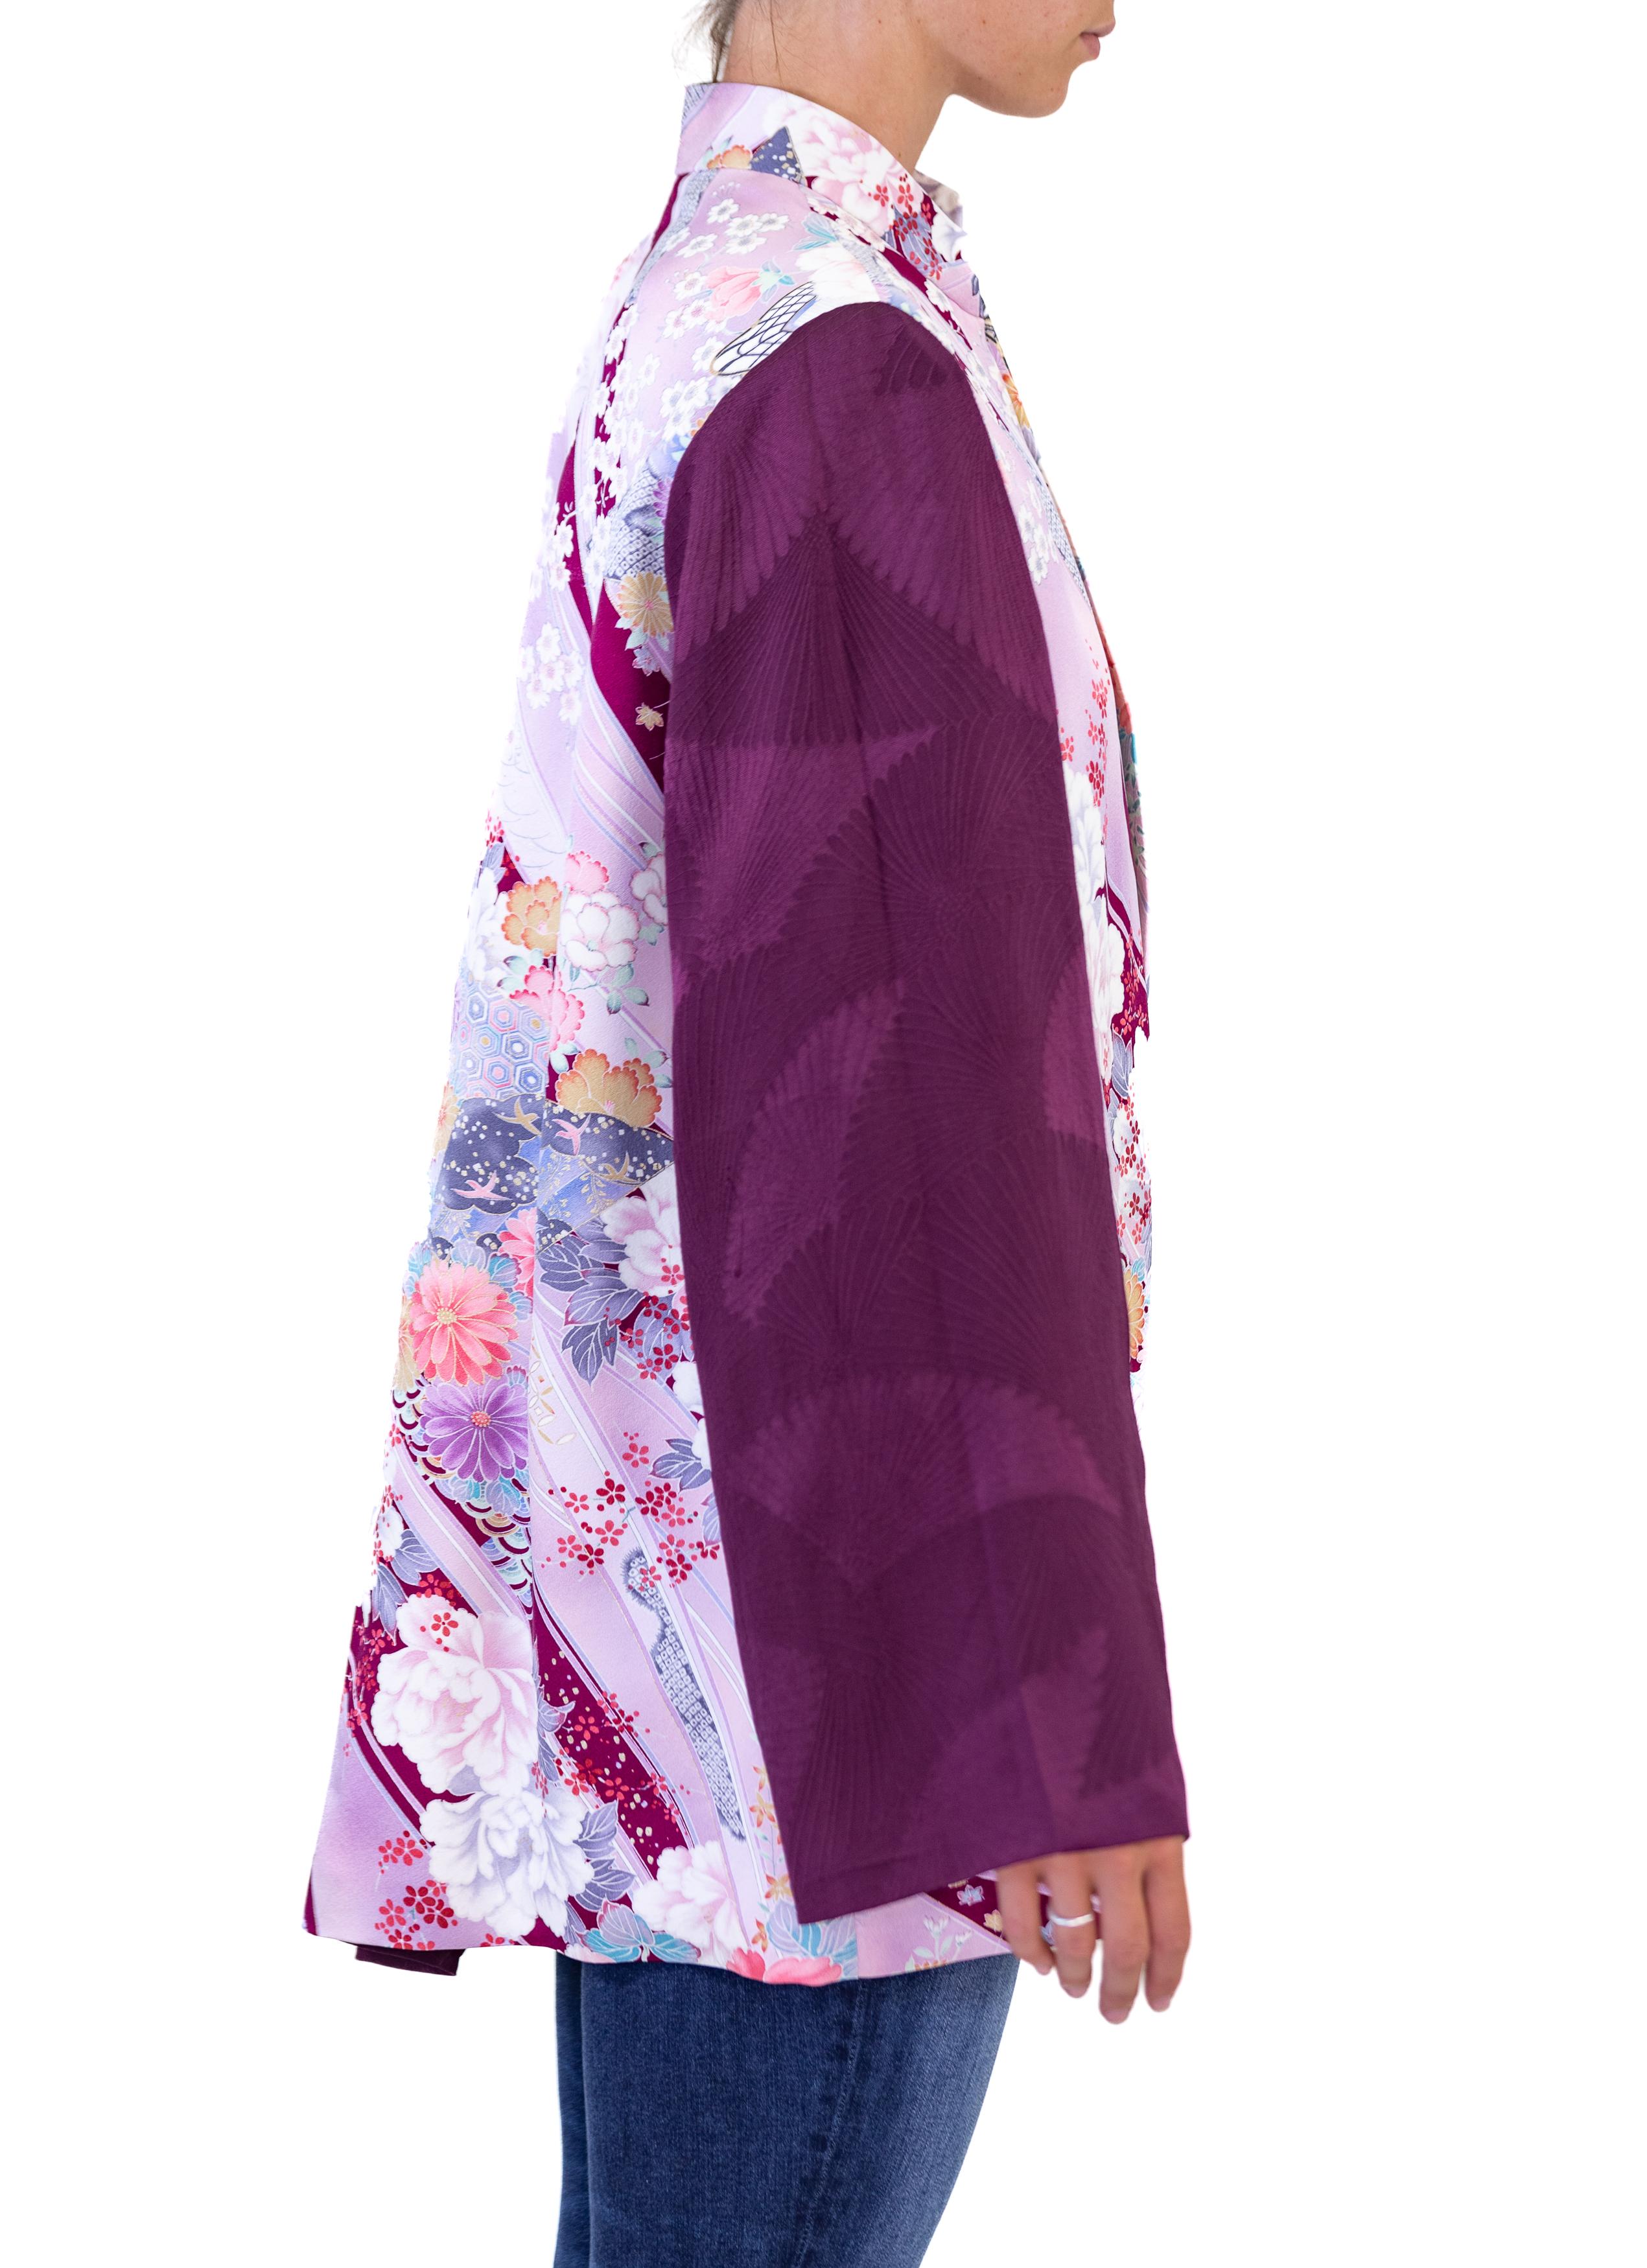 Morphew Collection Purple Floral Japanese Kimono Silk Jacket With Solid Sleeves
MORPHEW COLLECTION is made entirely by hand in our NYC Ateliér of rare antique materials sourced from around the globe. Our sustainable vintage materials represent over